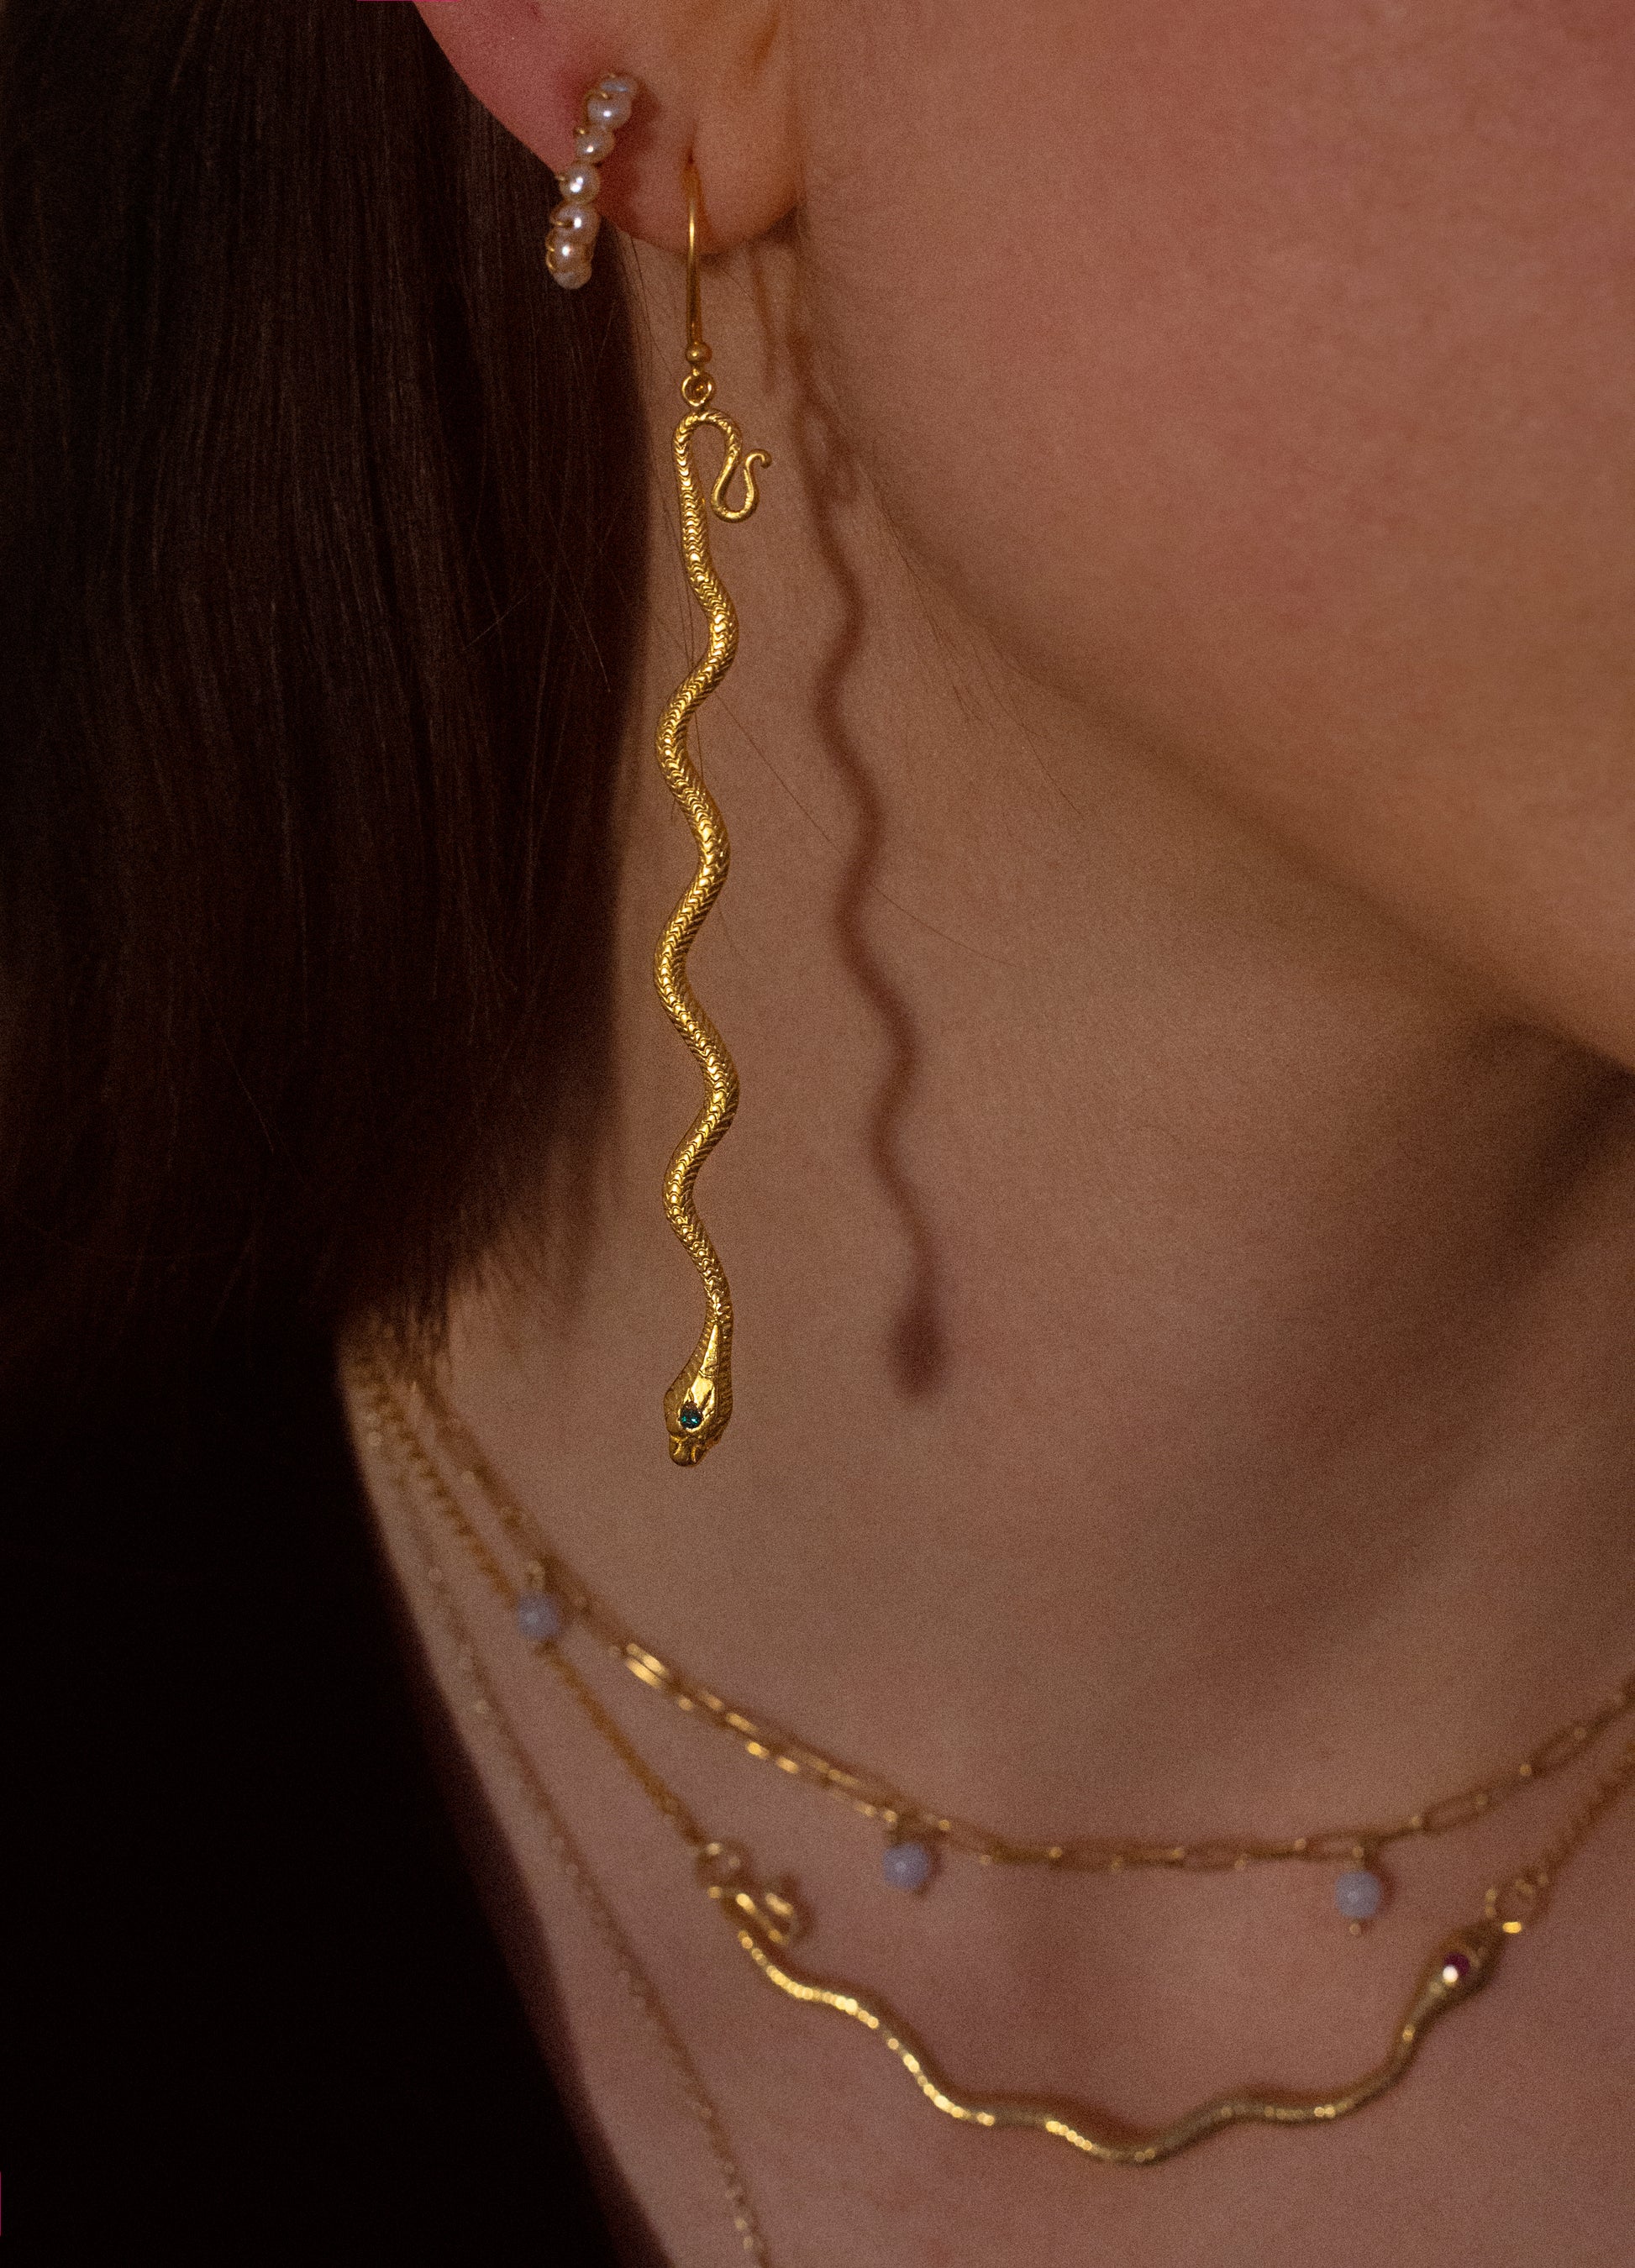 snake necklace and snake earrings